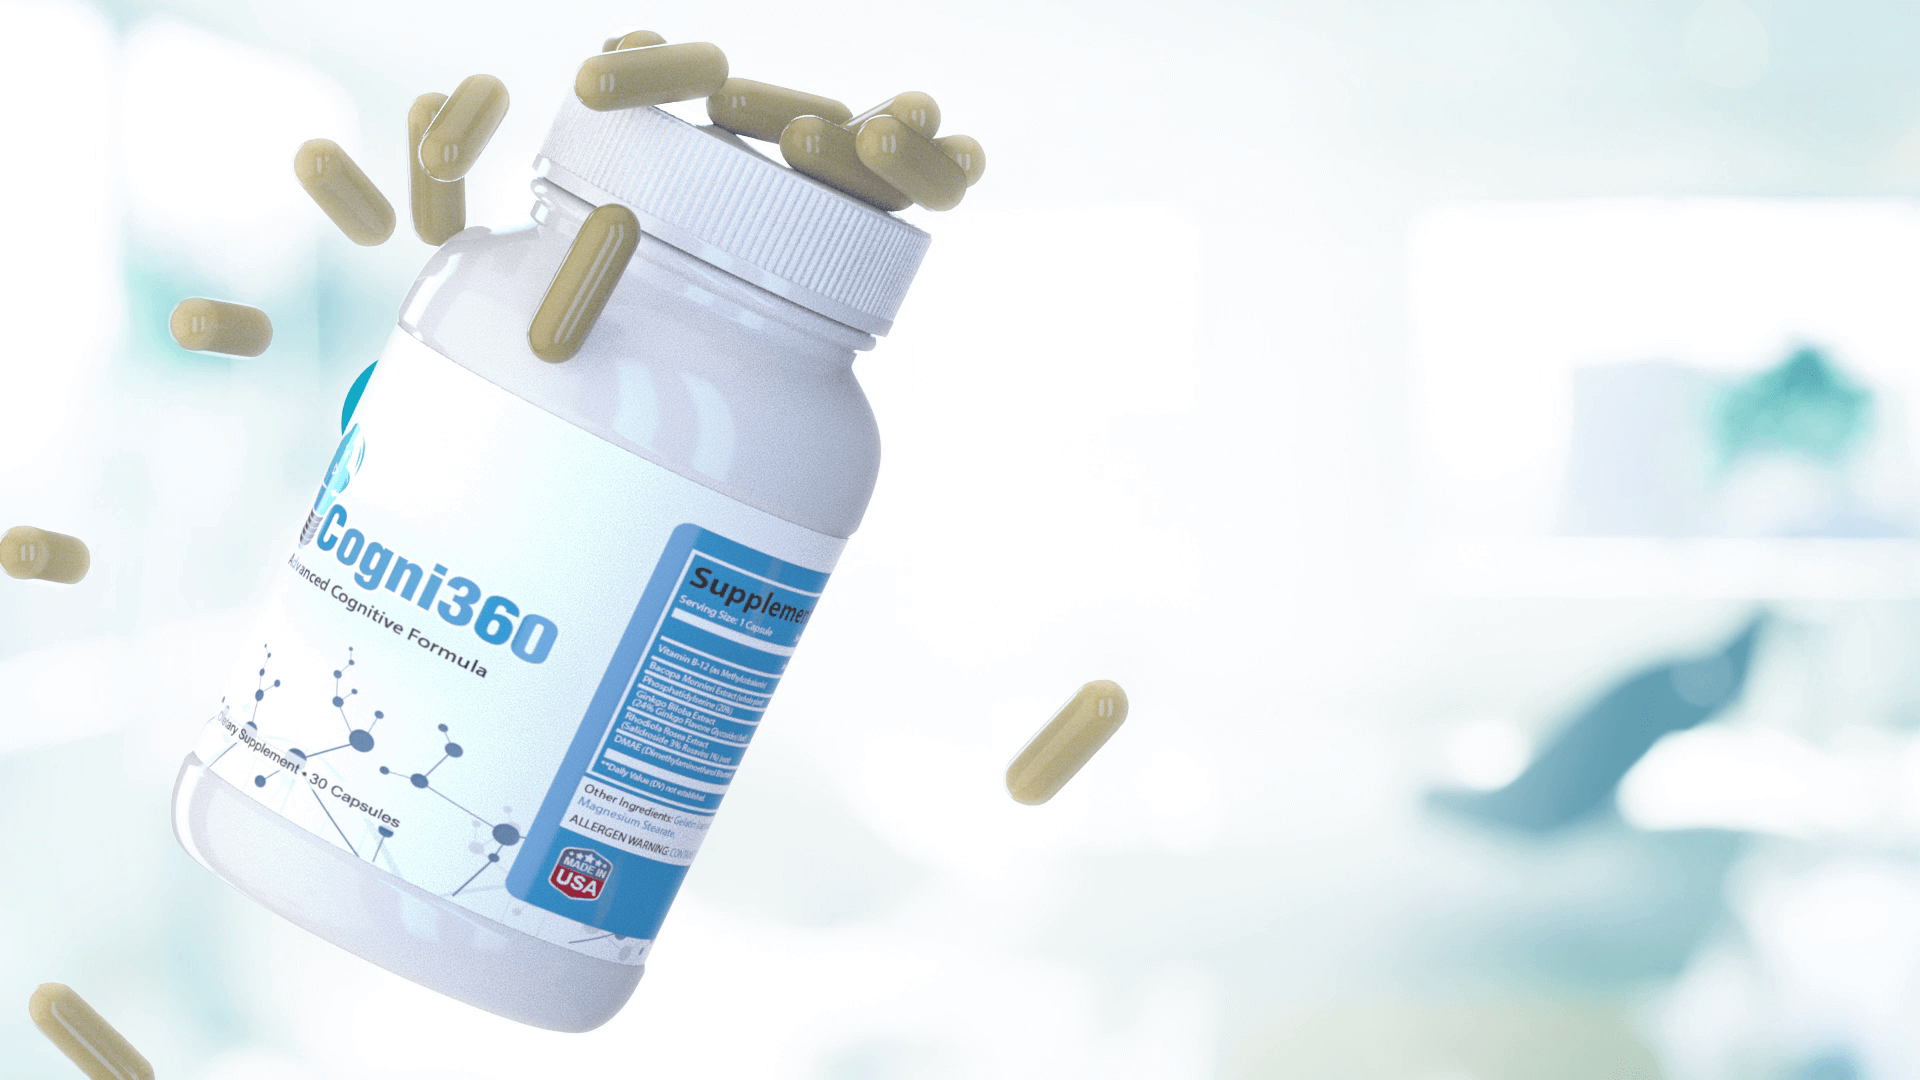 Cogni 360 is brain nutrition nootropics brand for your brain health and it work against brain fog this video sales script, video production, 3d animation presentation for VSL made by Fantastic Imago Branding, Advertising and Consulting Agency